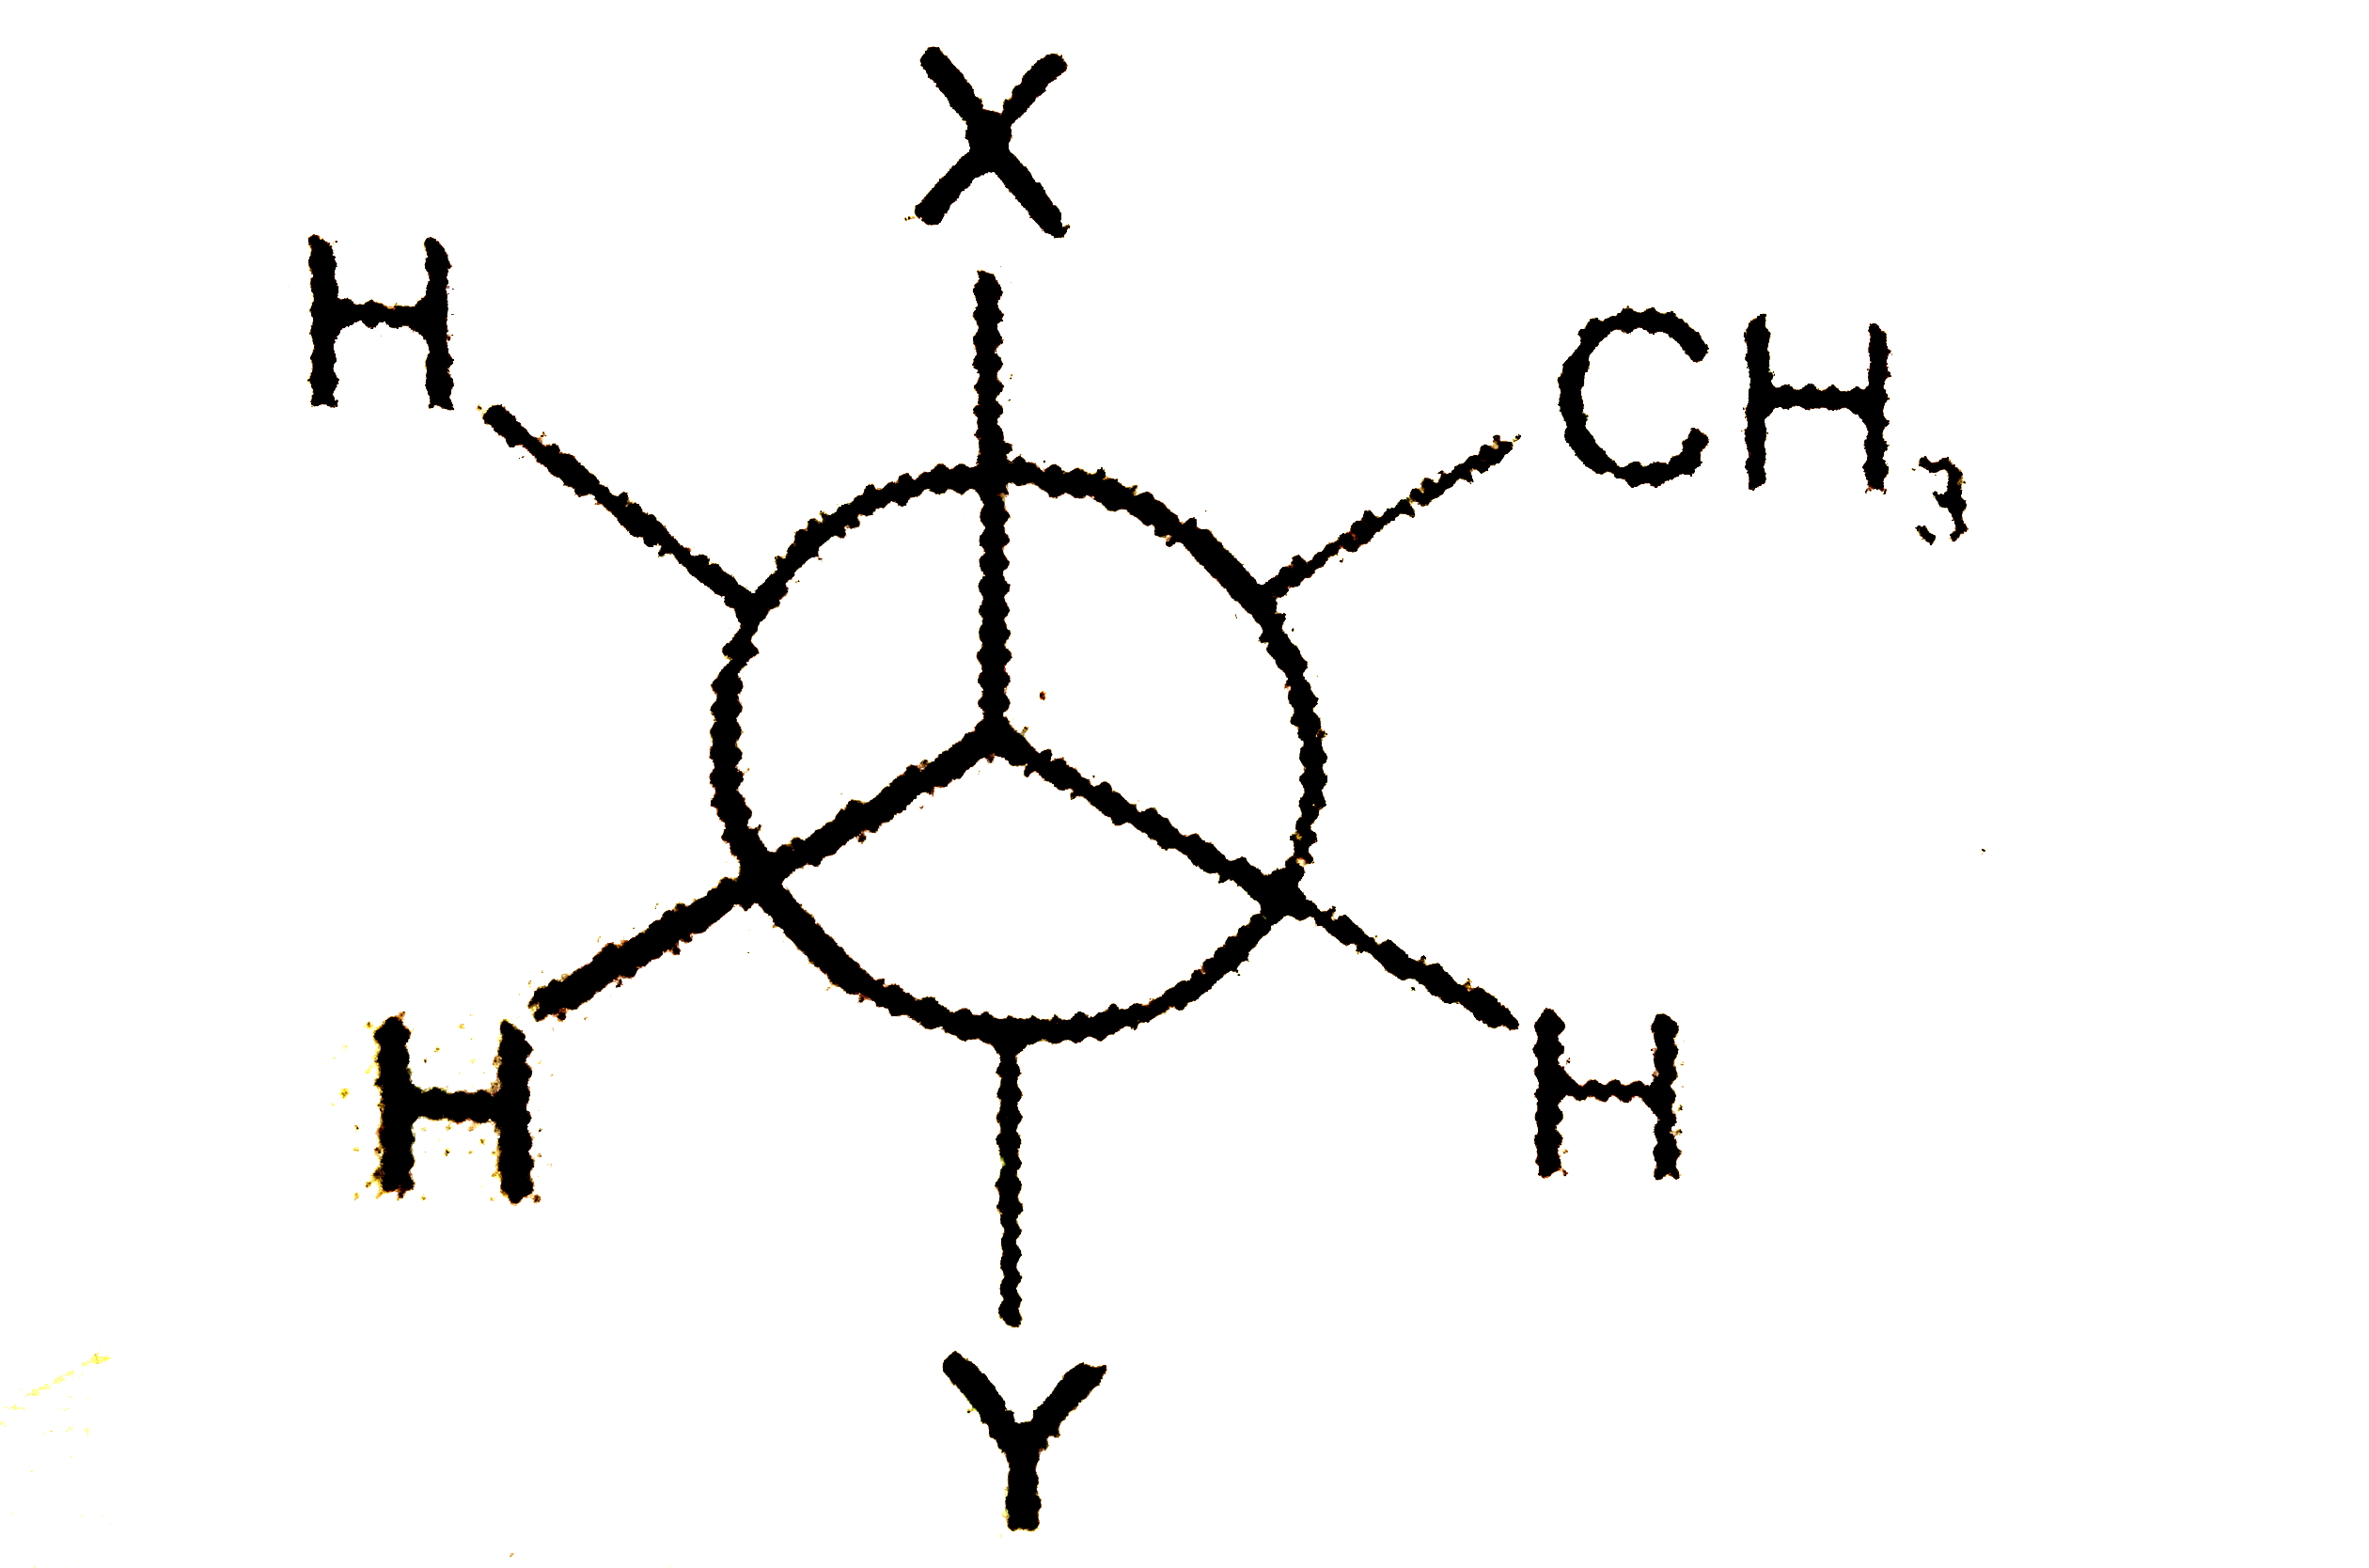 The newman projection formula of 2-3, dimethylbutane is given as      X,Y respectively can be: